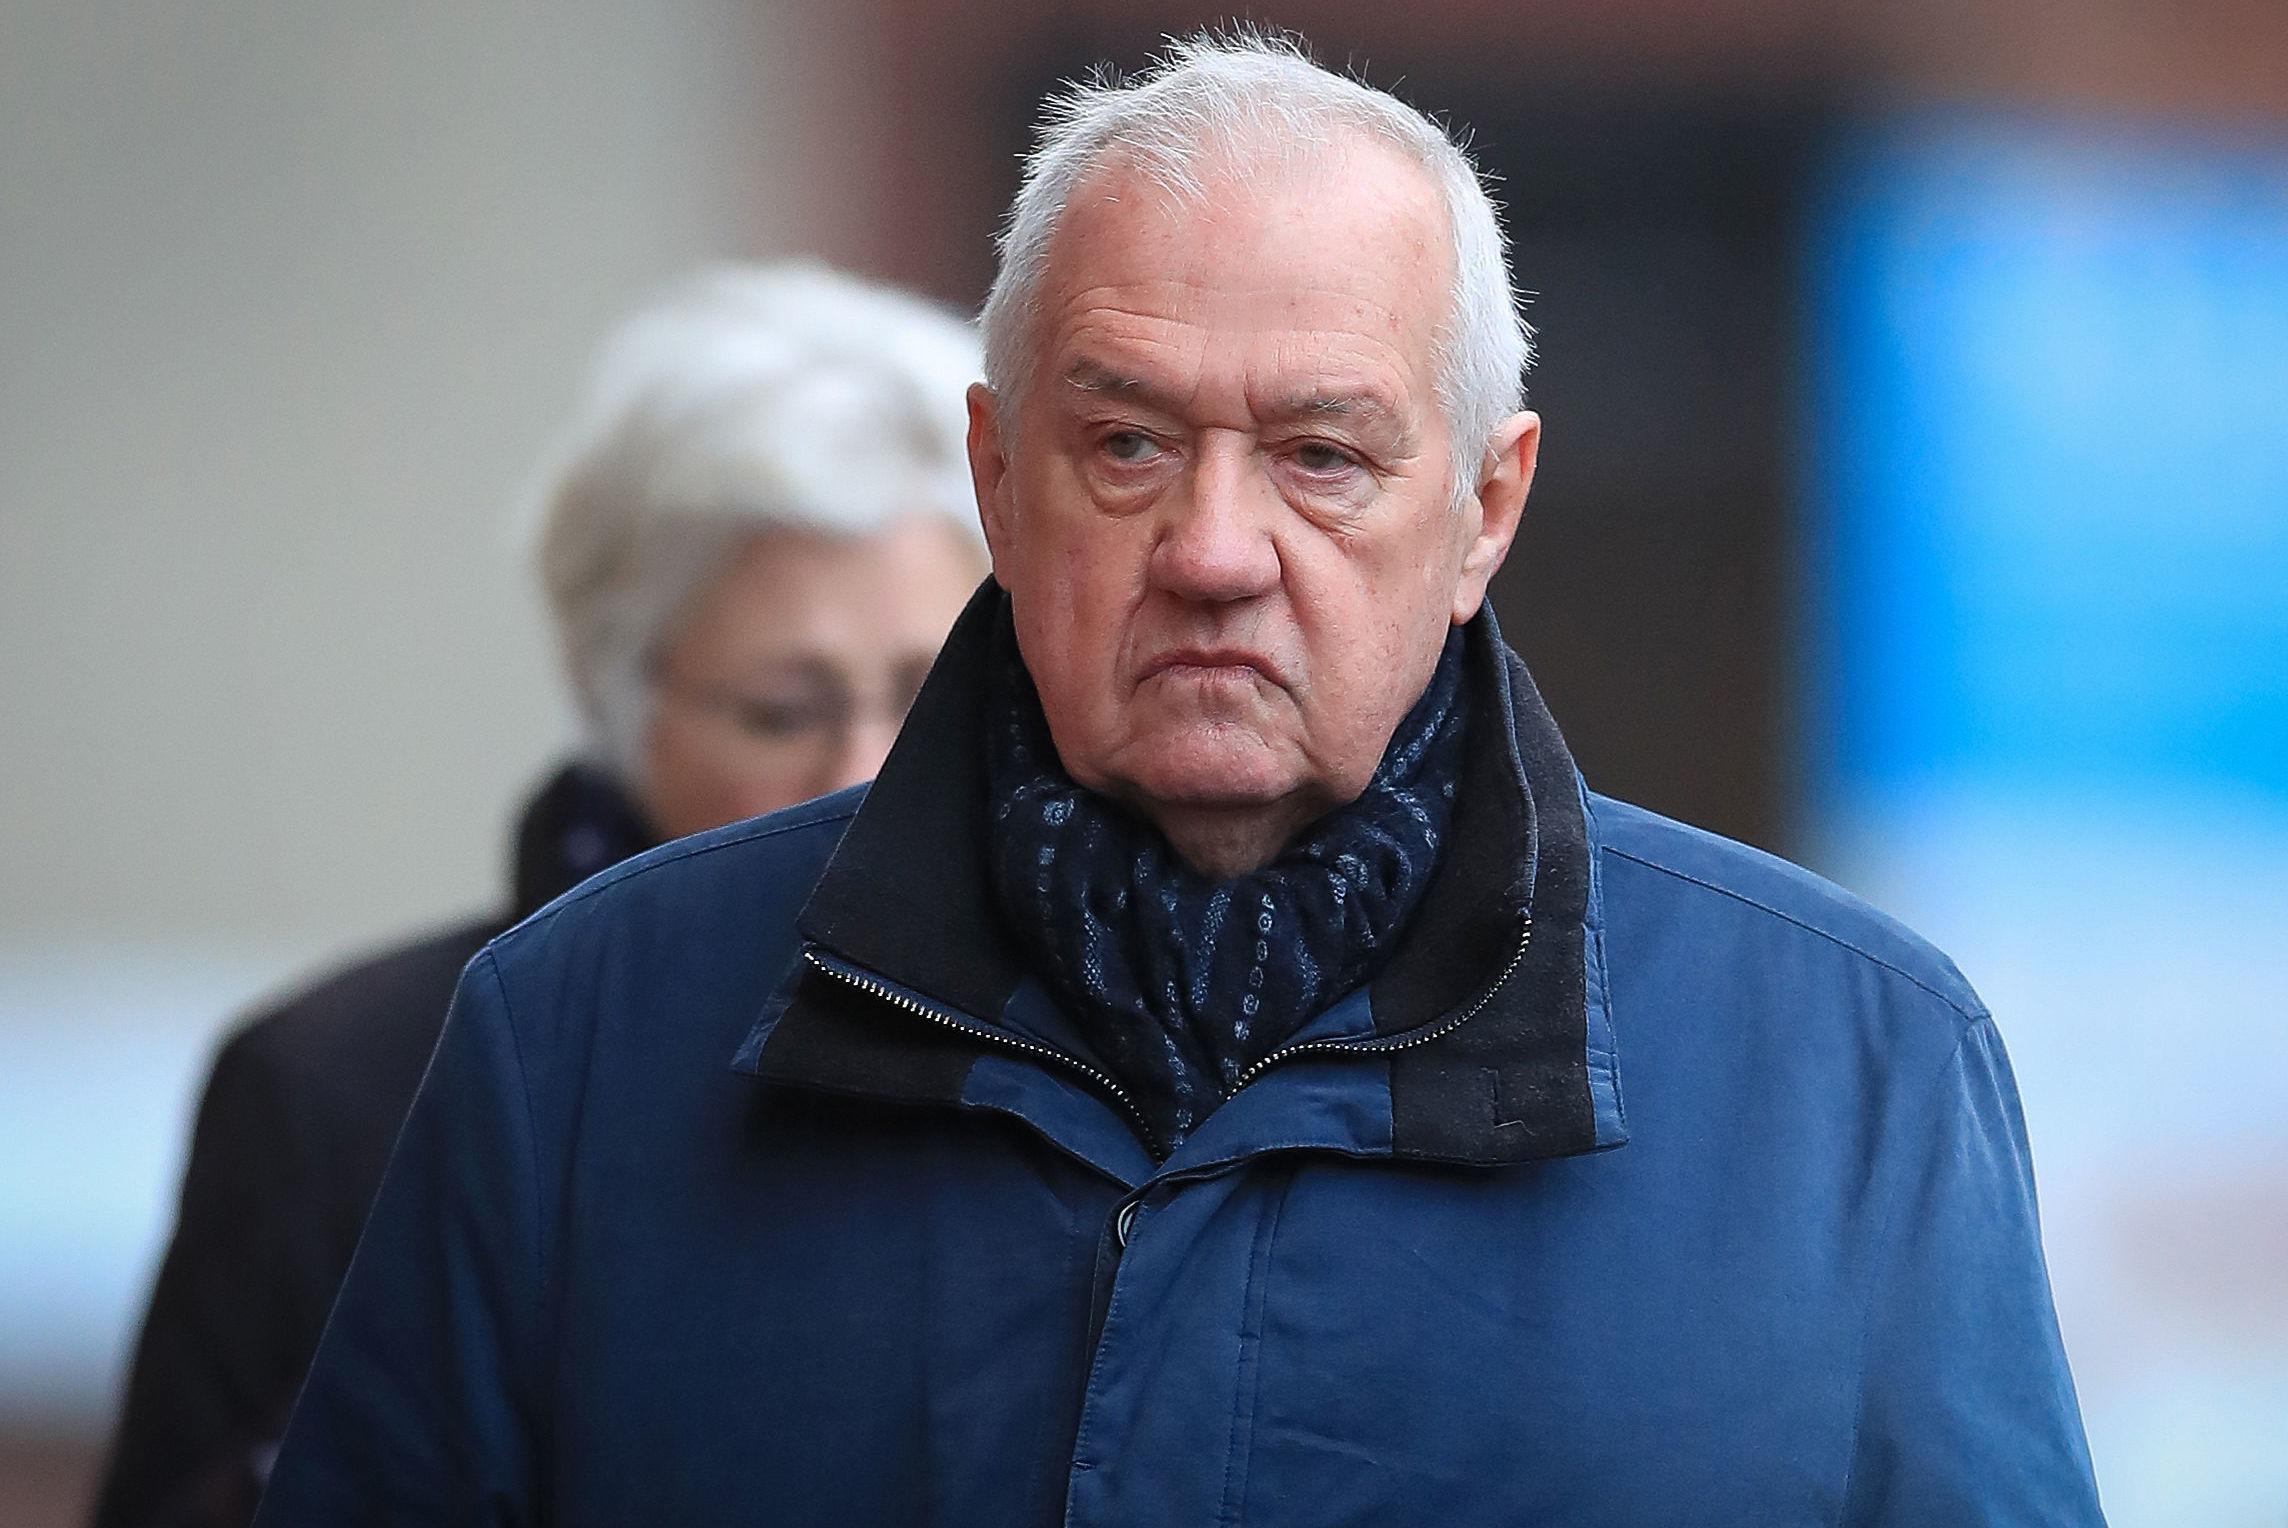 Match commander 'singled out unfairly' over Hillsborough disaster, court told